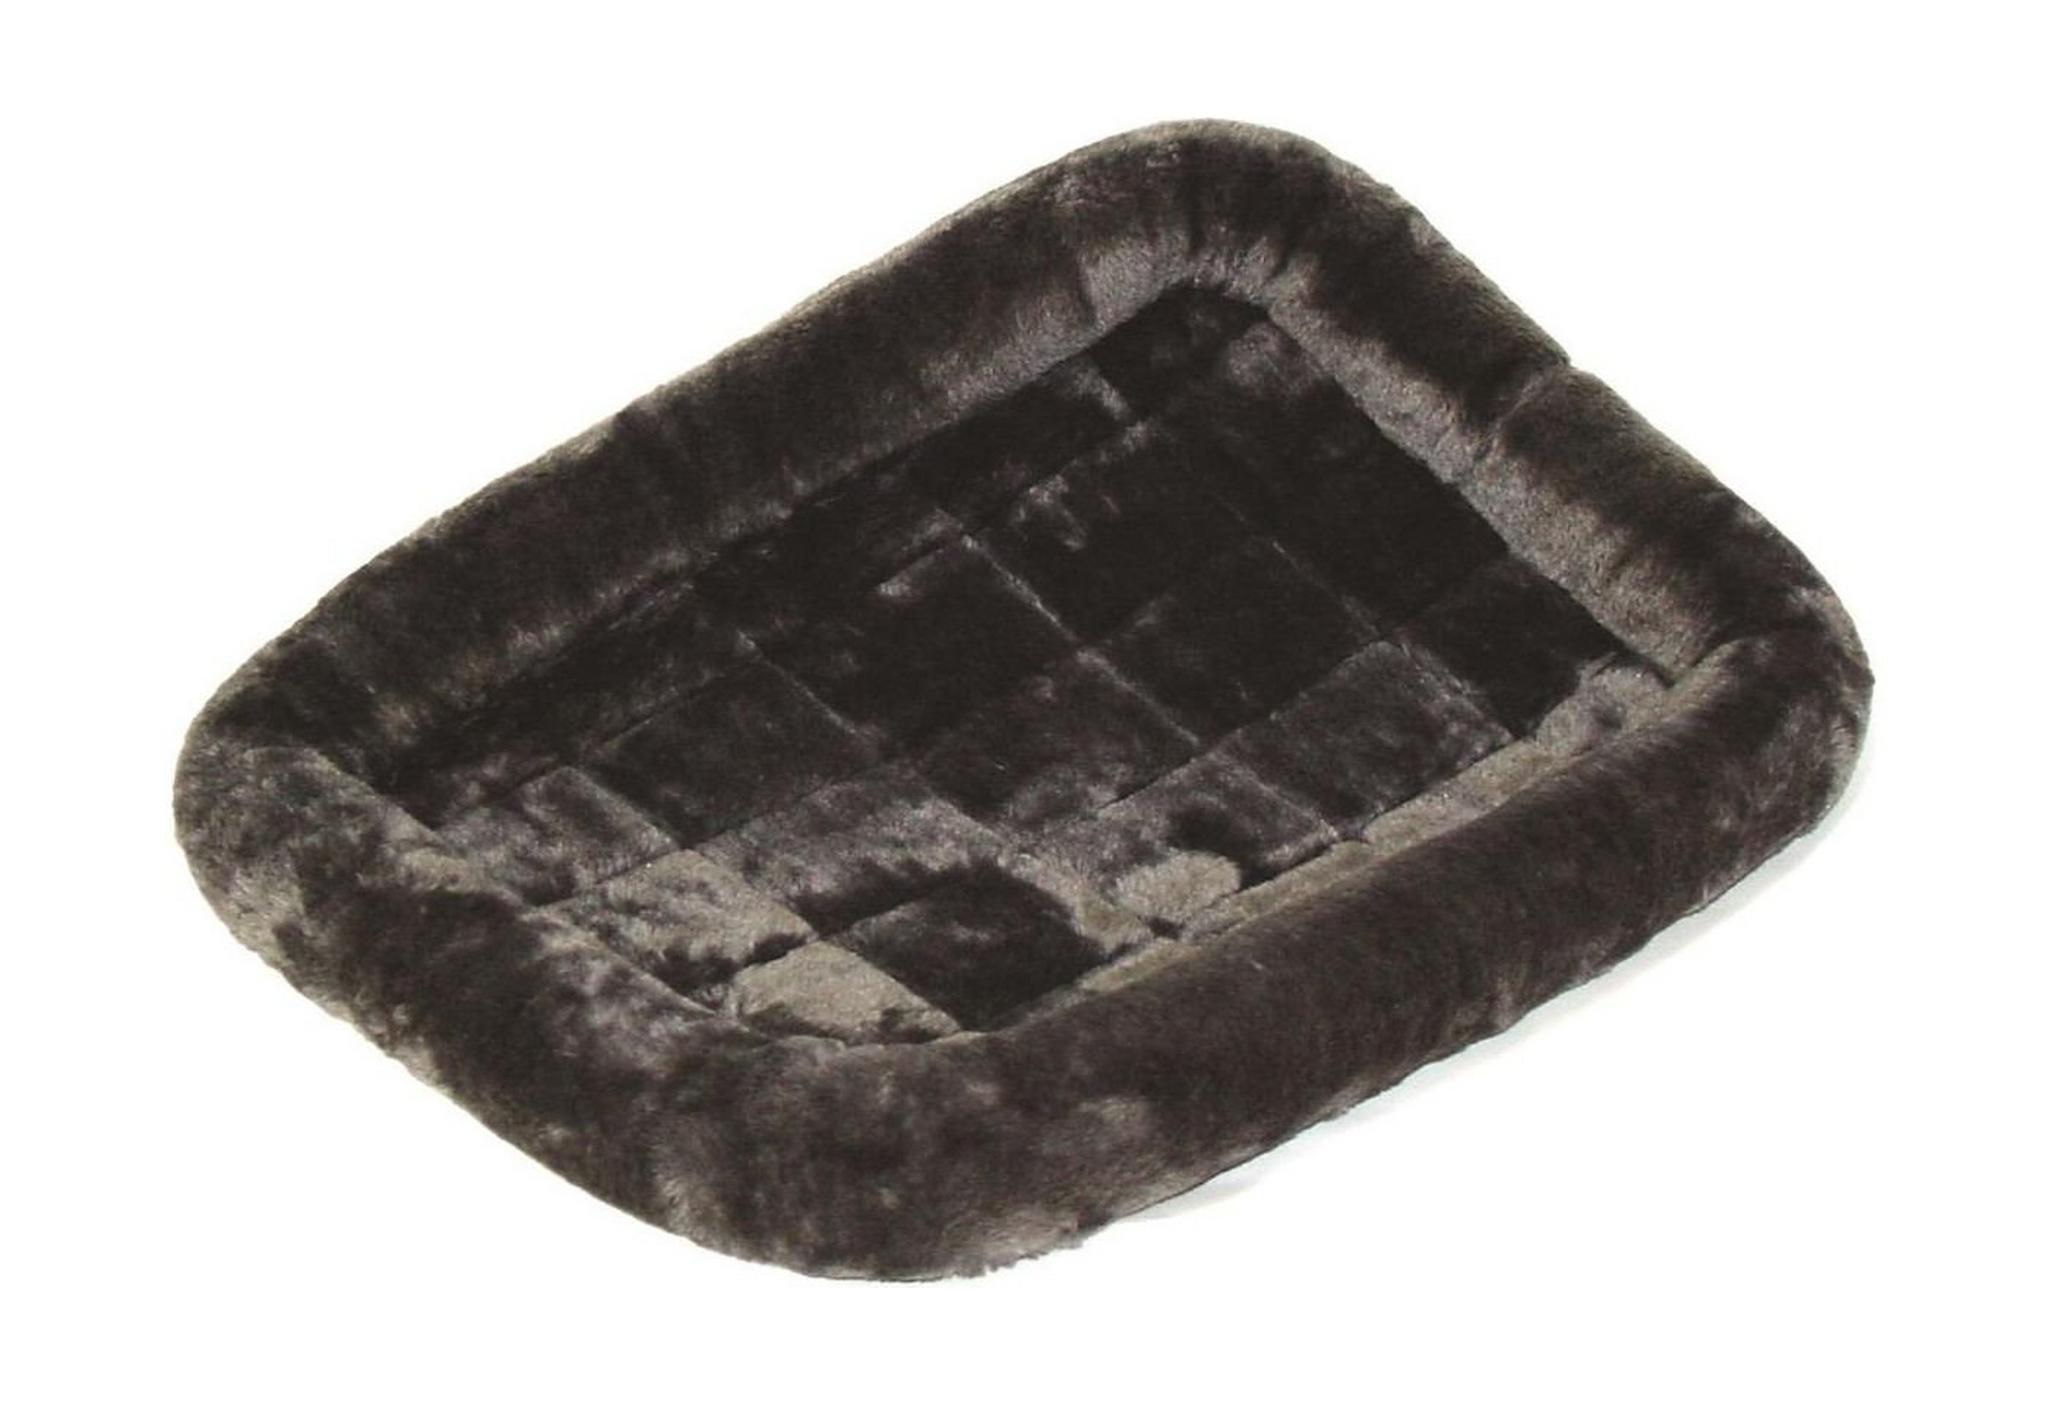 Medwest Quiet Time Pet Bed, 48-Inch x 30-Inch - Gray